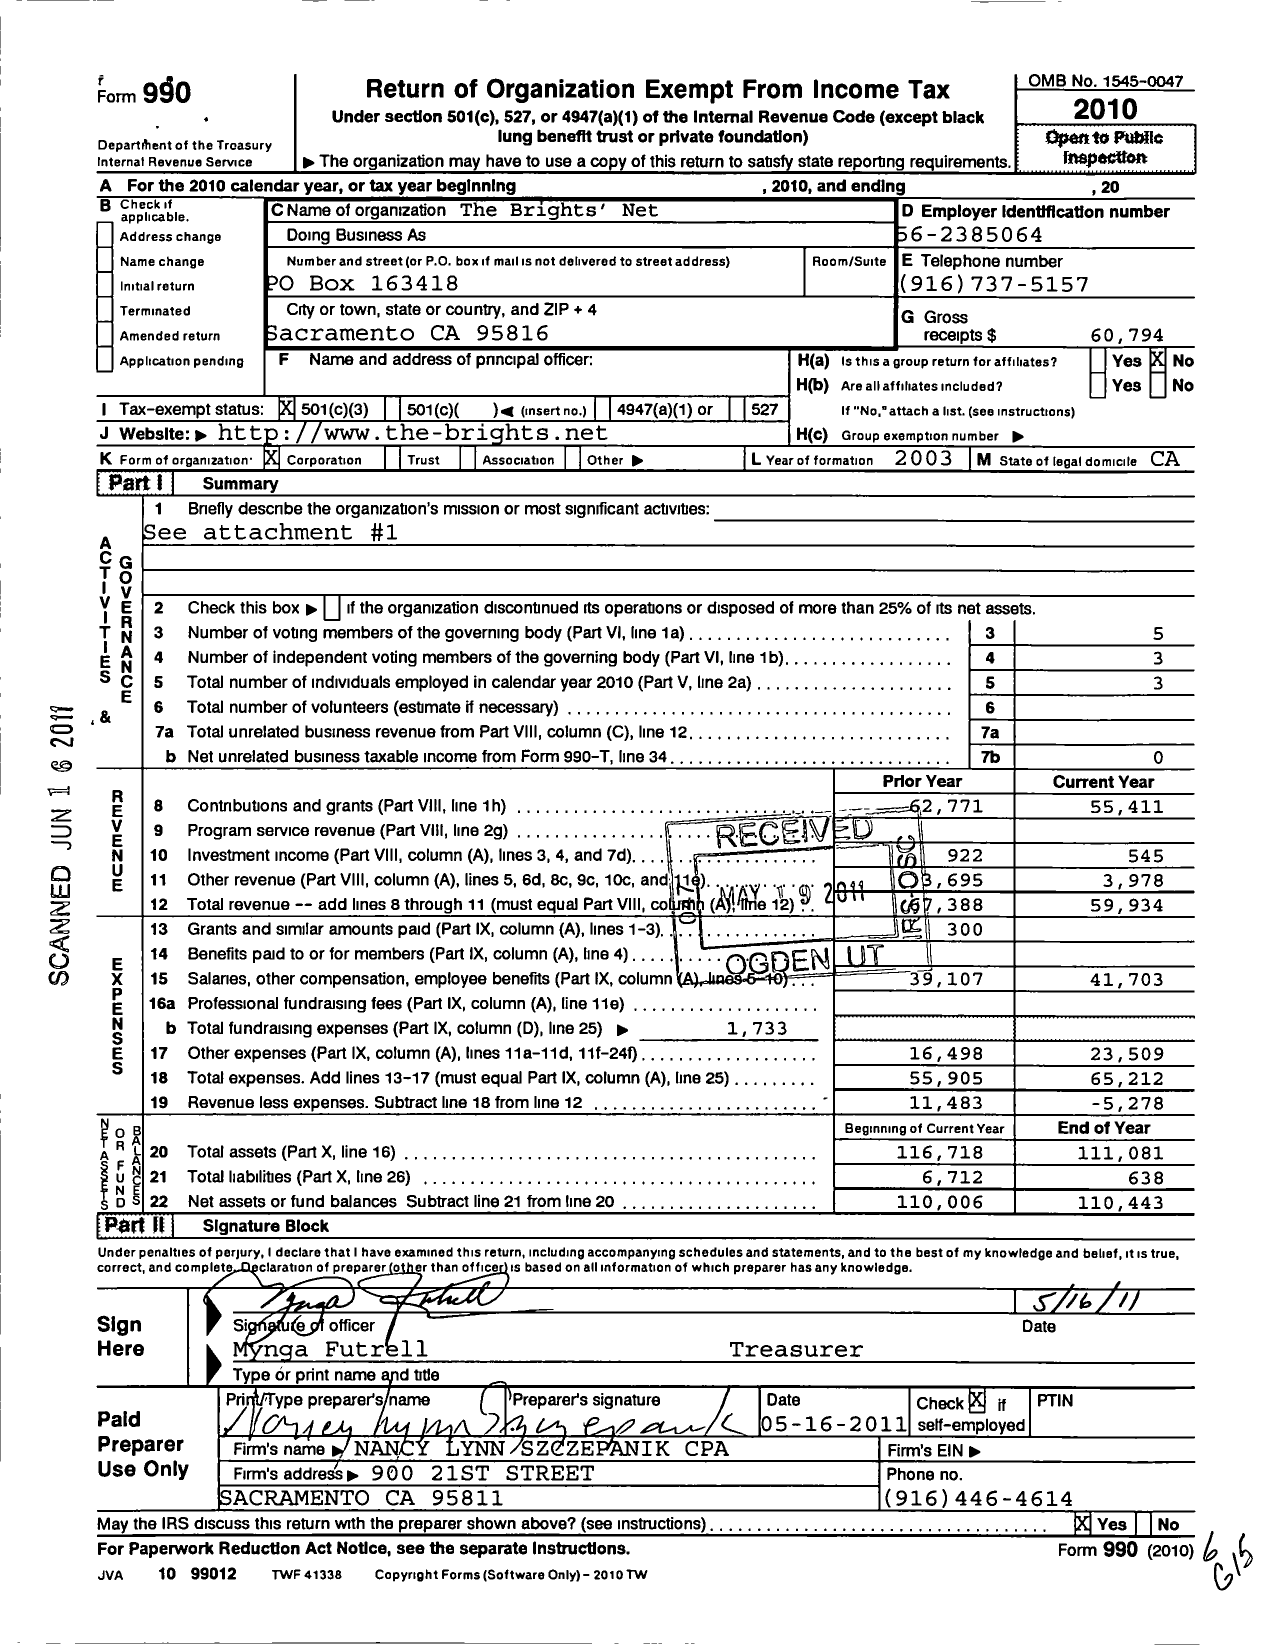 Image of first page of 2010 Form 990 for Brights Net